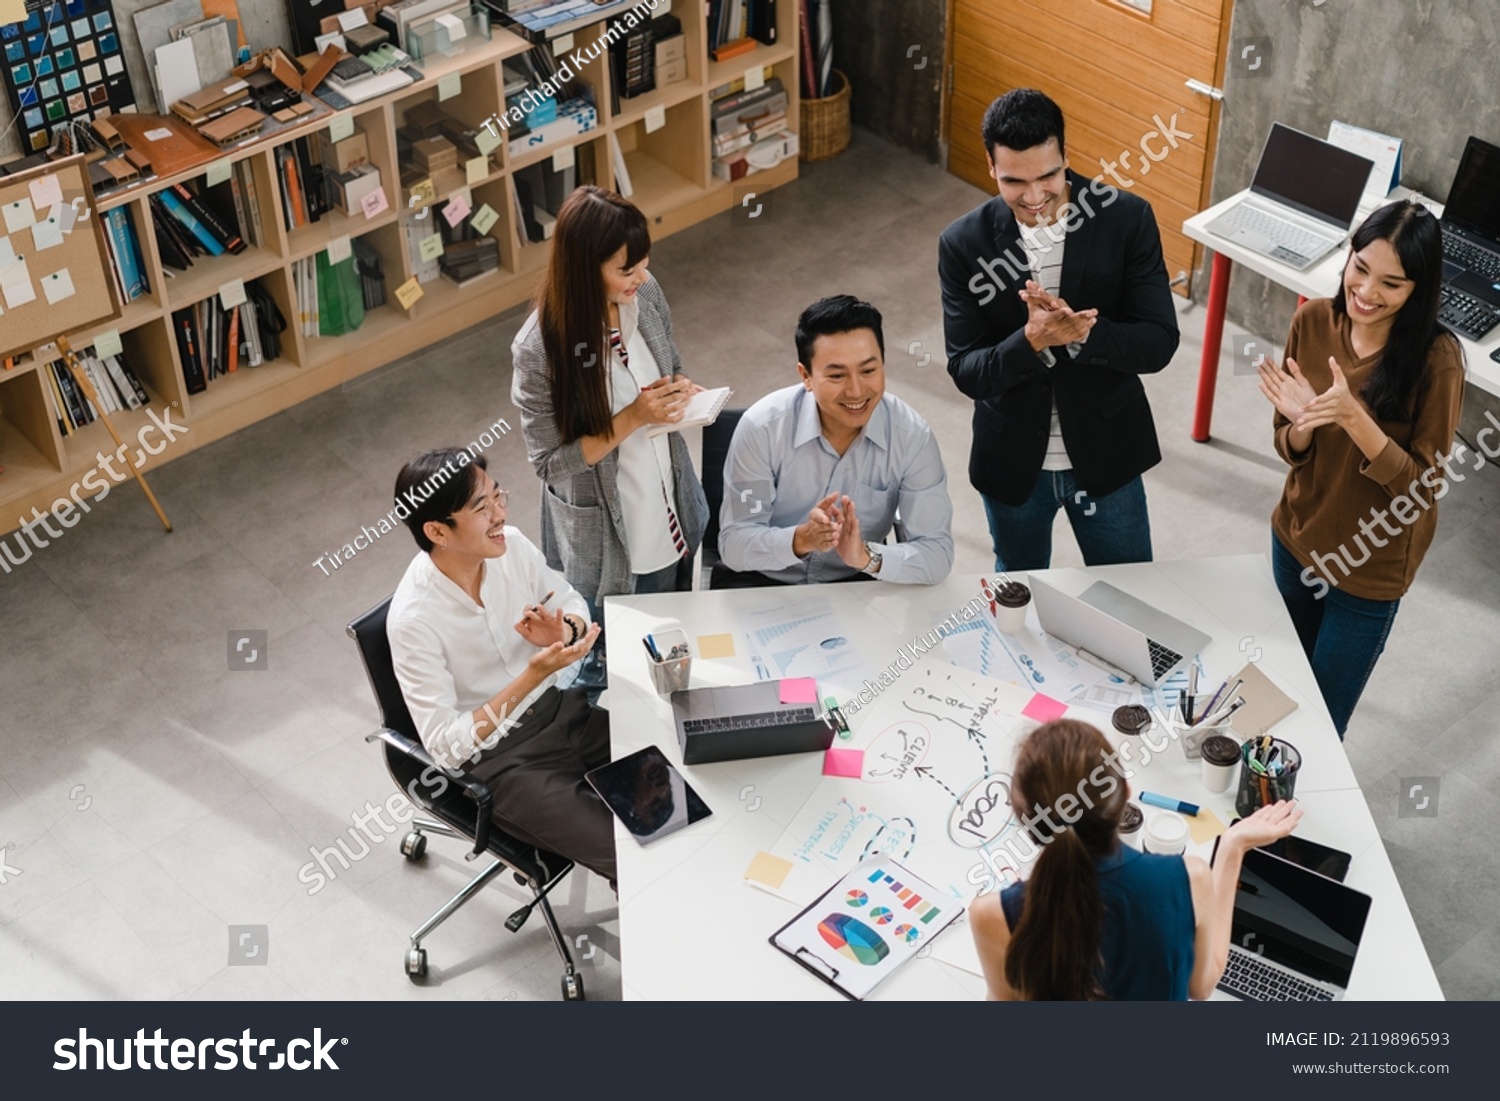 Multiracial group of Asia young creative people in smart casual wear discussing business clapping, laughing and smiling together in brainstorm meeting at office. Coworker teamwork successful concept. #2119896593